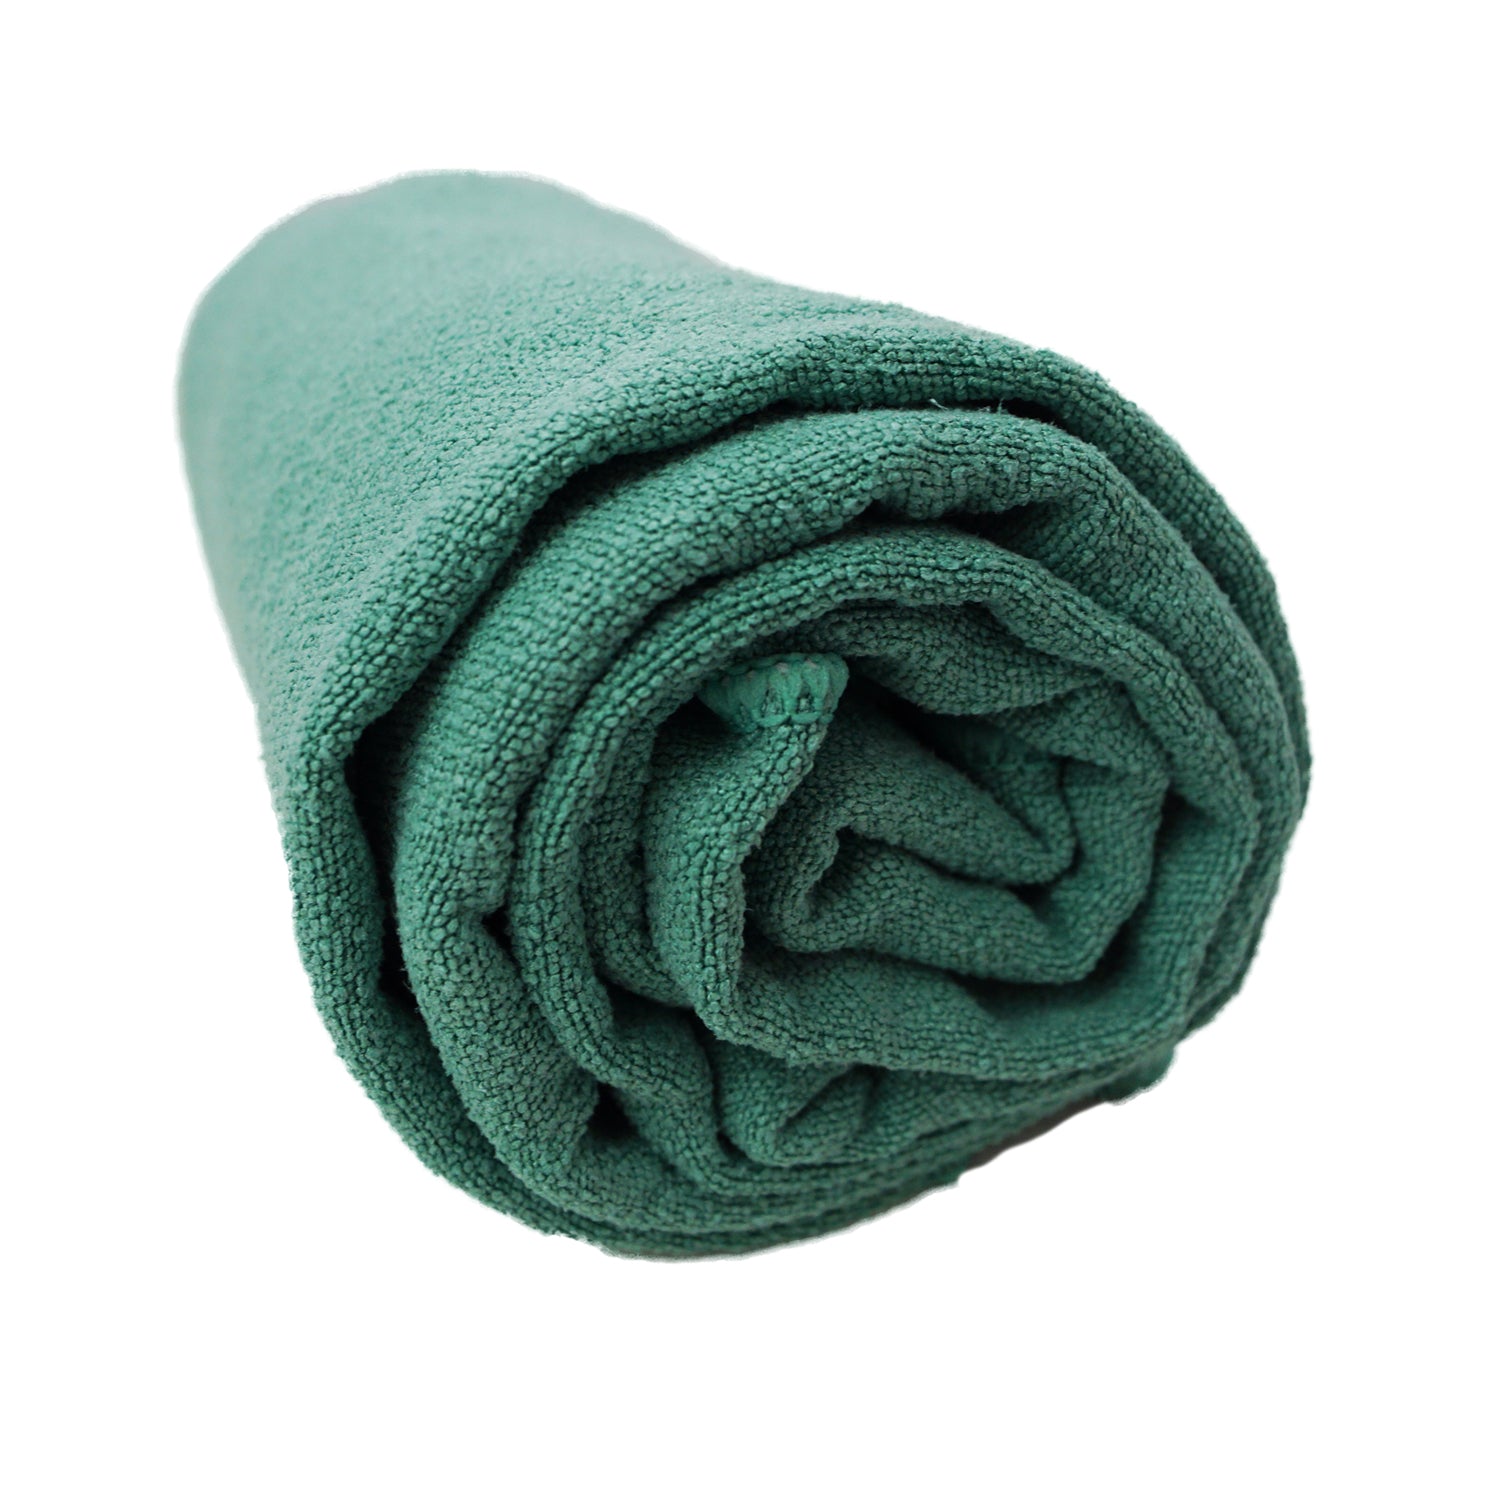 YDL Yoga Hand Towel - Ultra-Grippy, Moisture Absorbing & Quick-Dry